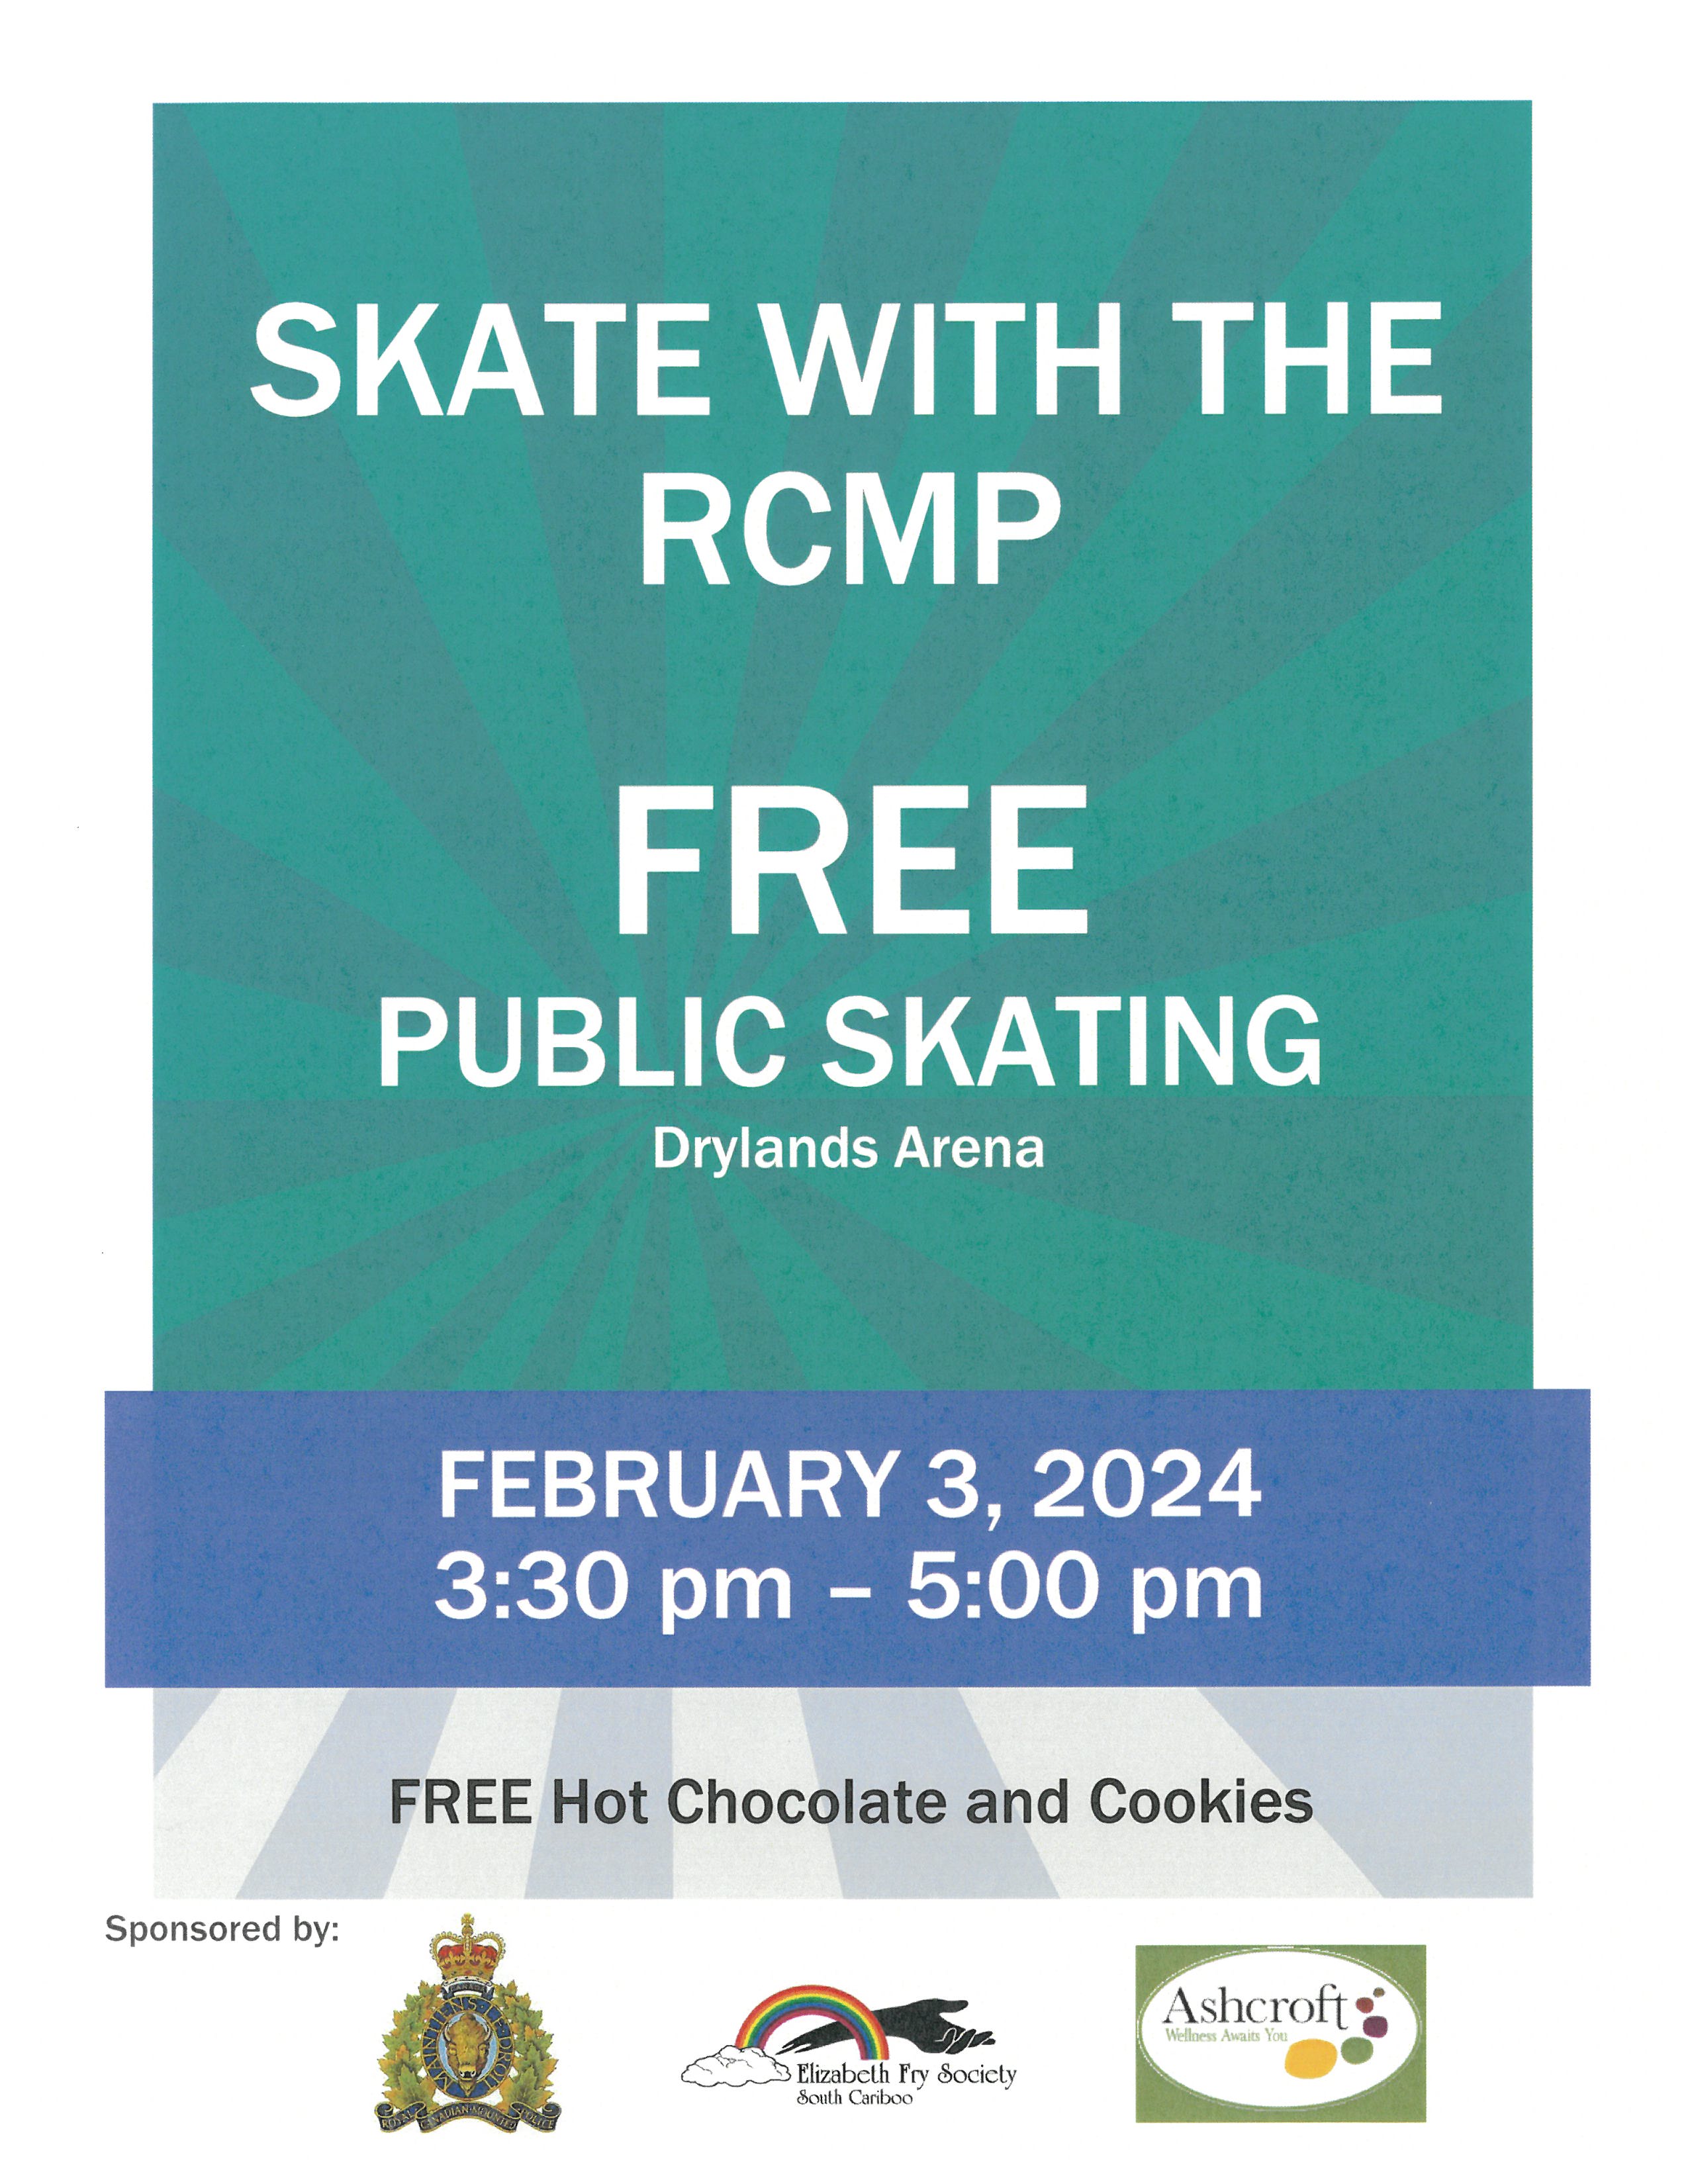 FREE Public Skating - Skate with the RCMP